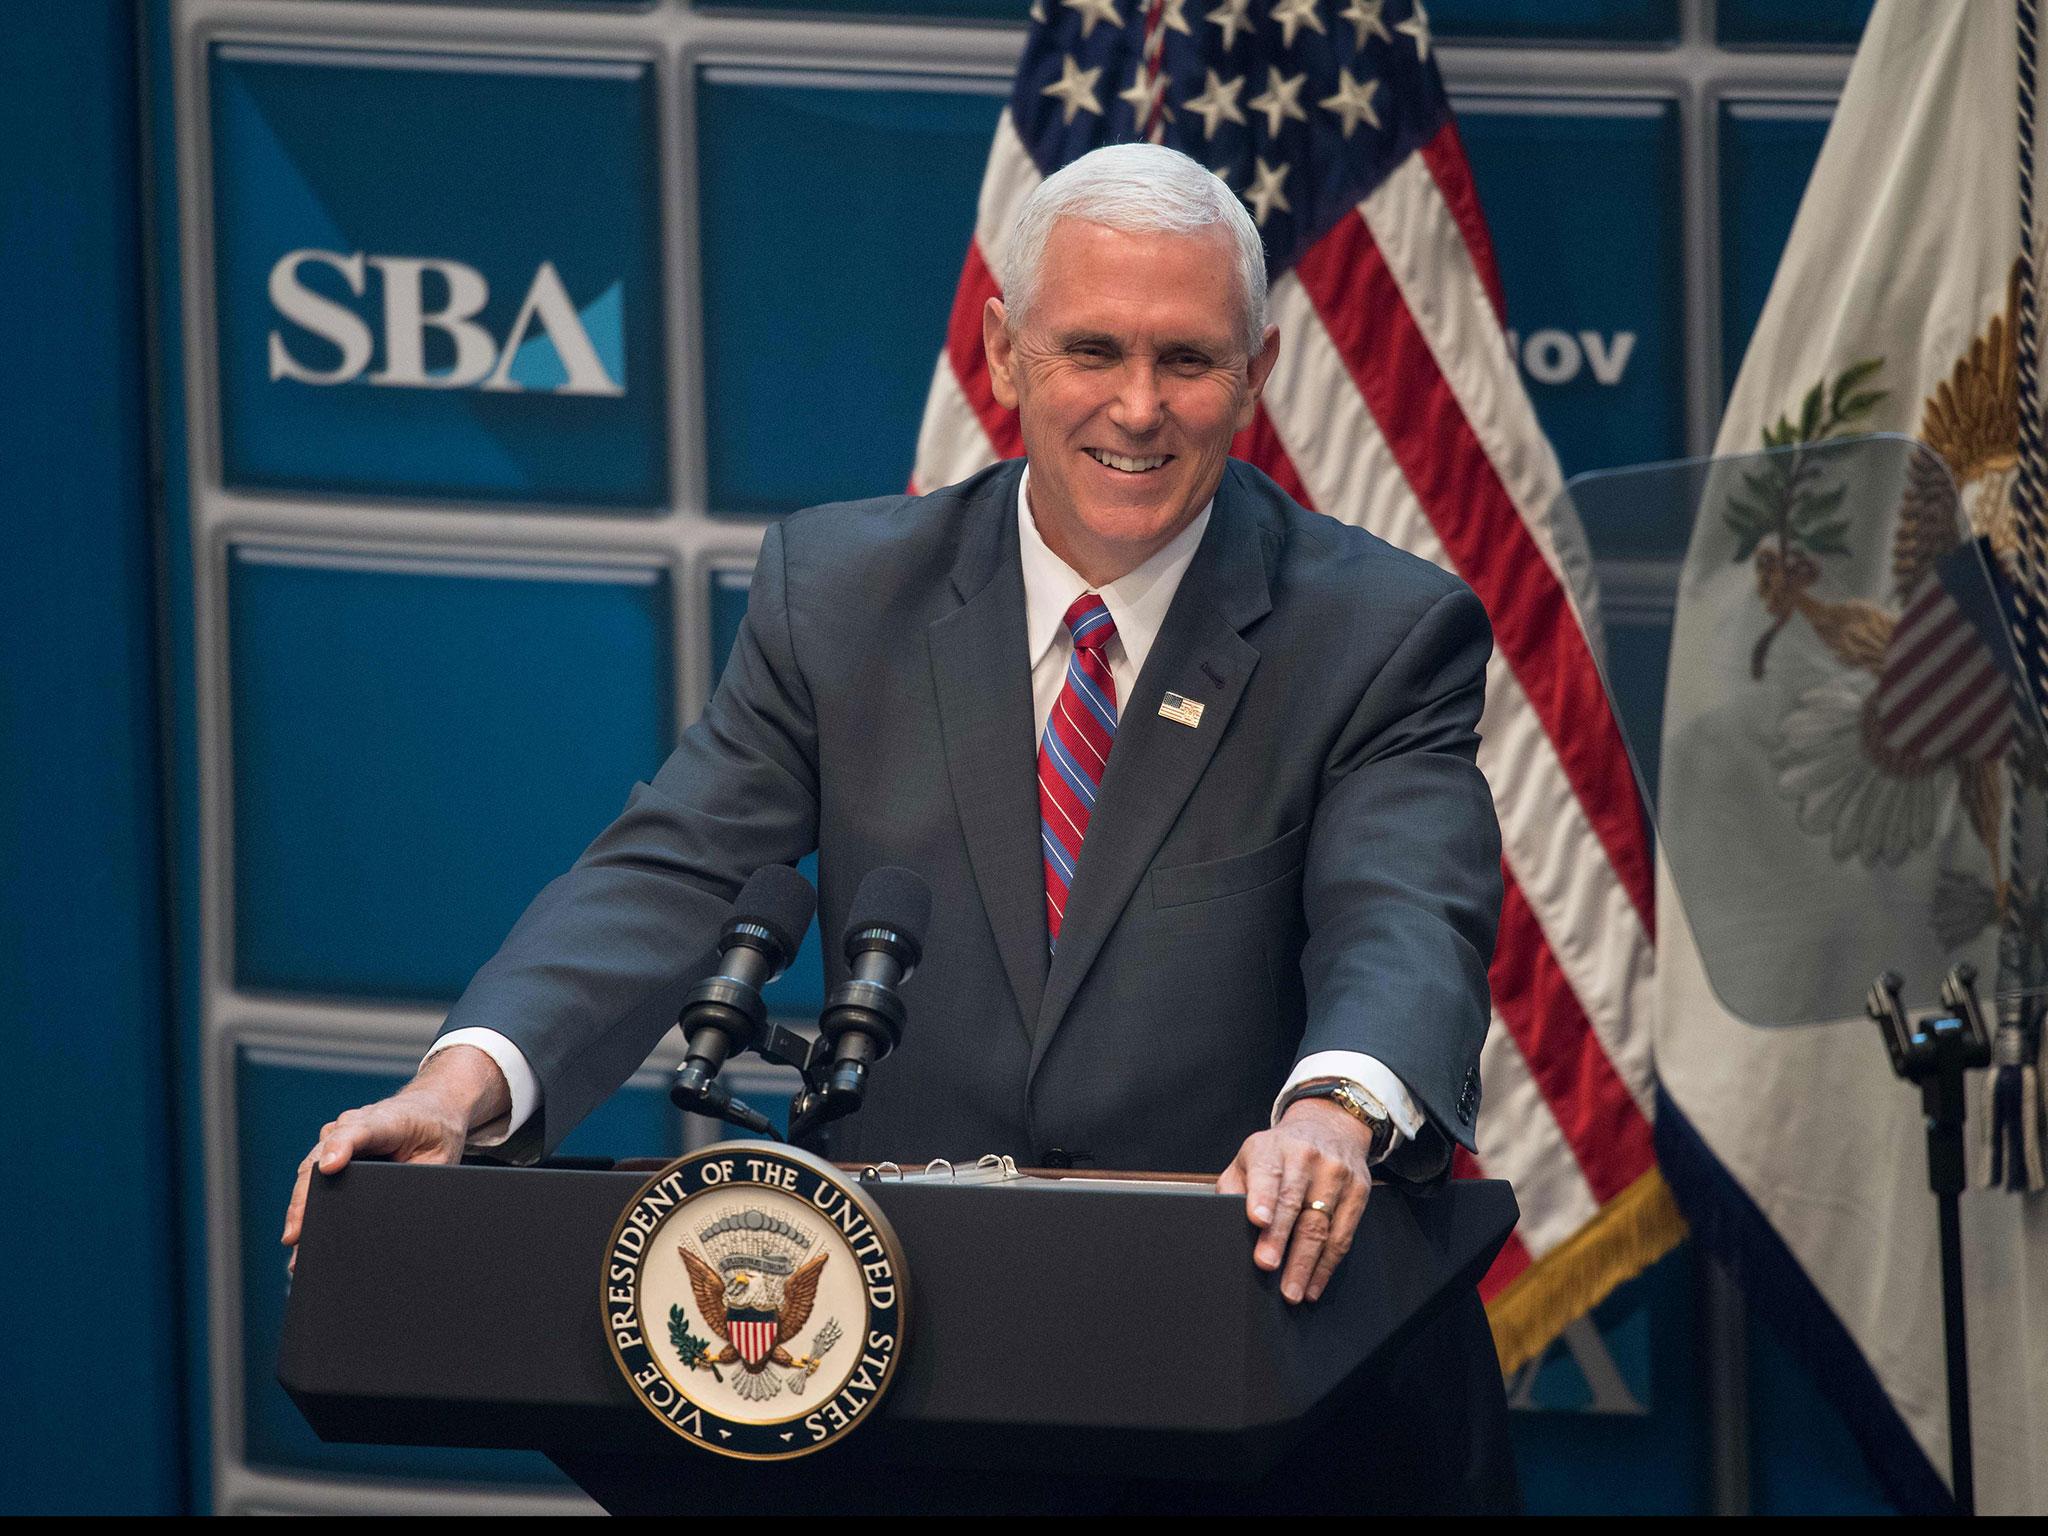 US Vice President Mike Pence speaks at a National Small Business Week event in Washington DC/